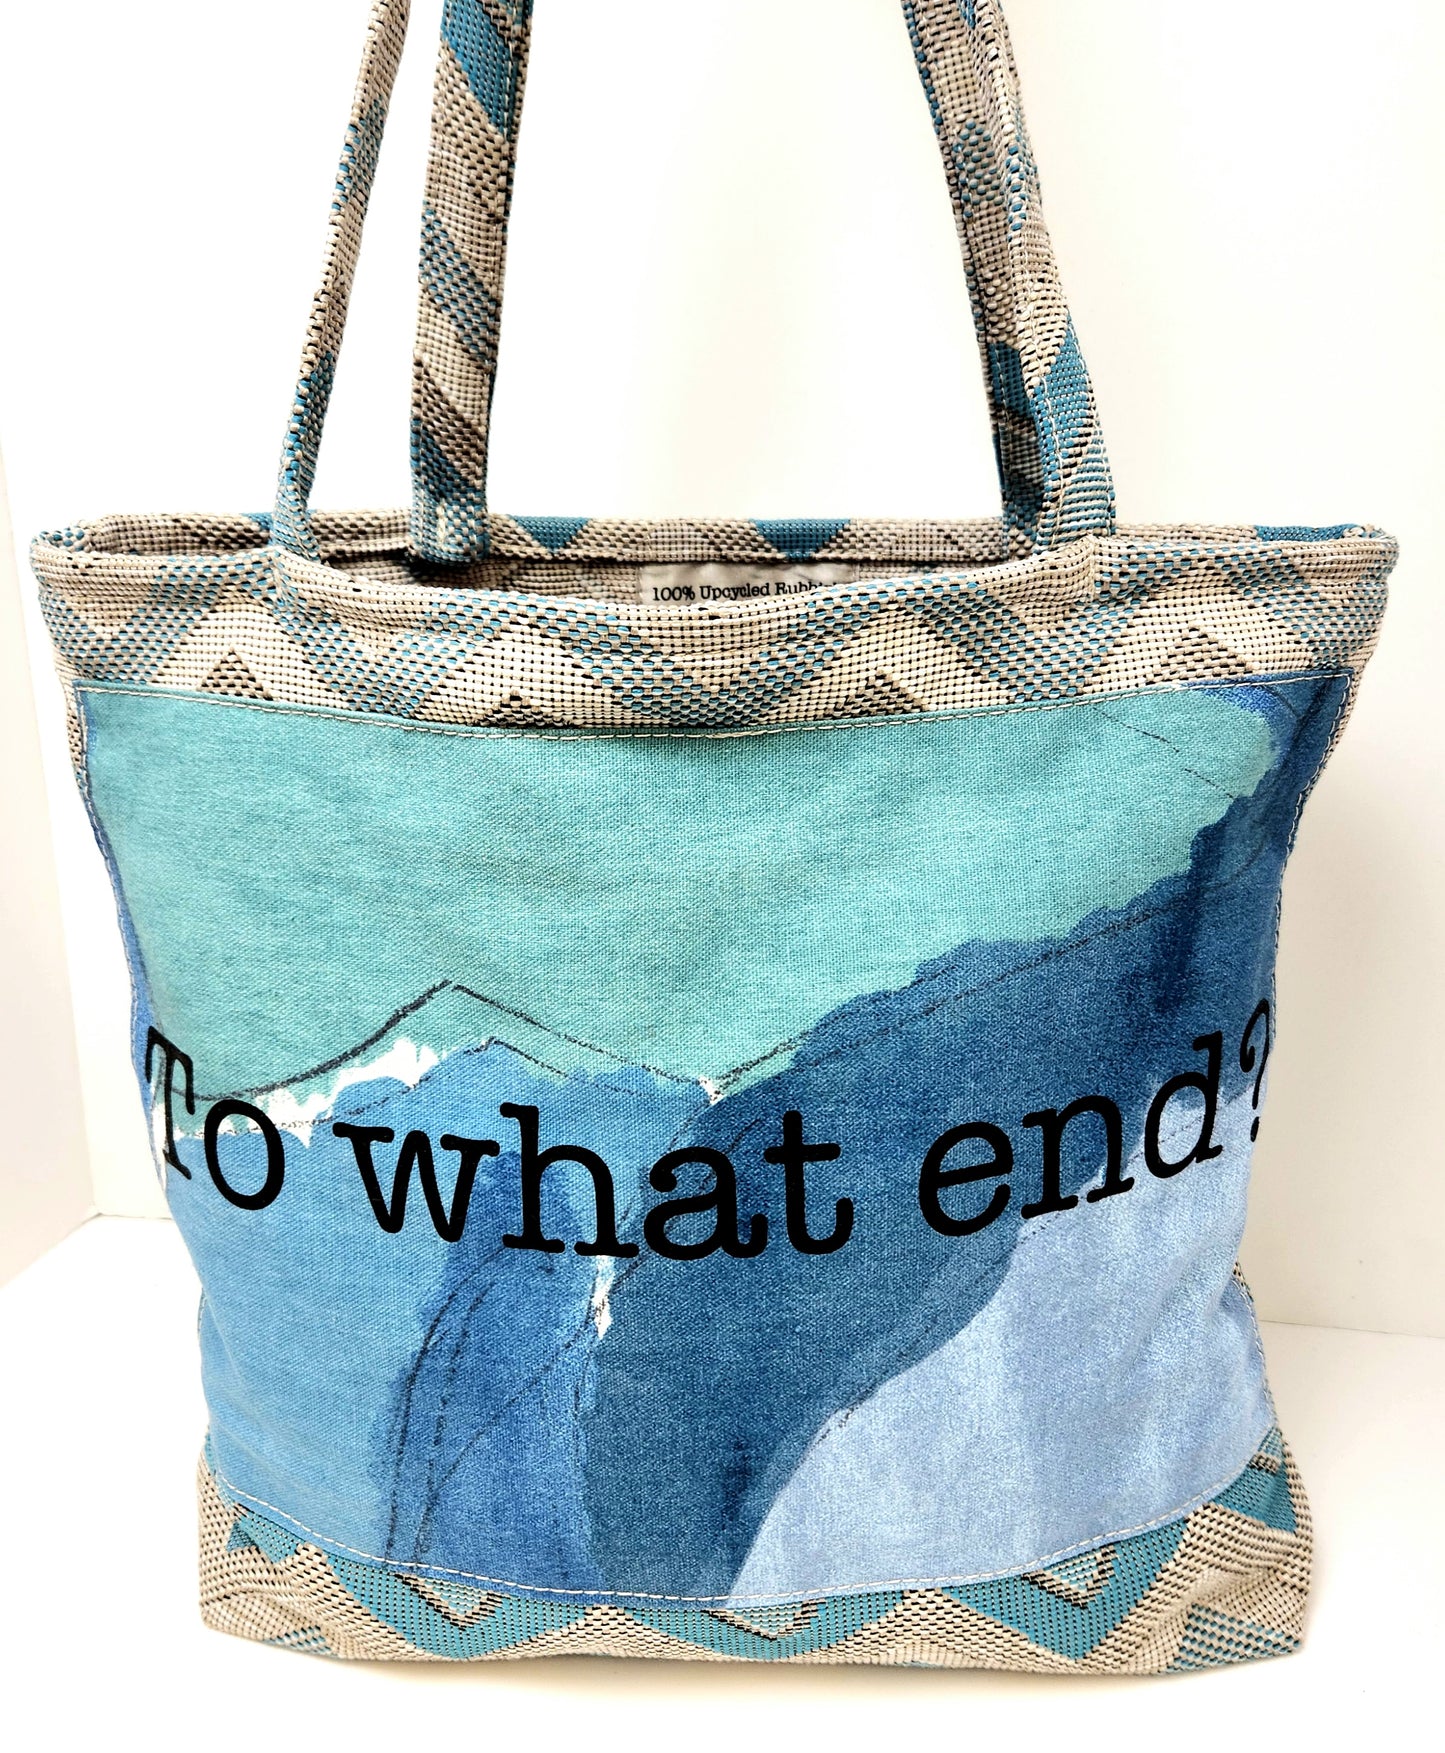 Open tote (upholstery)